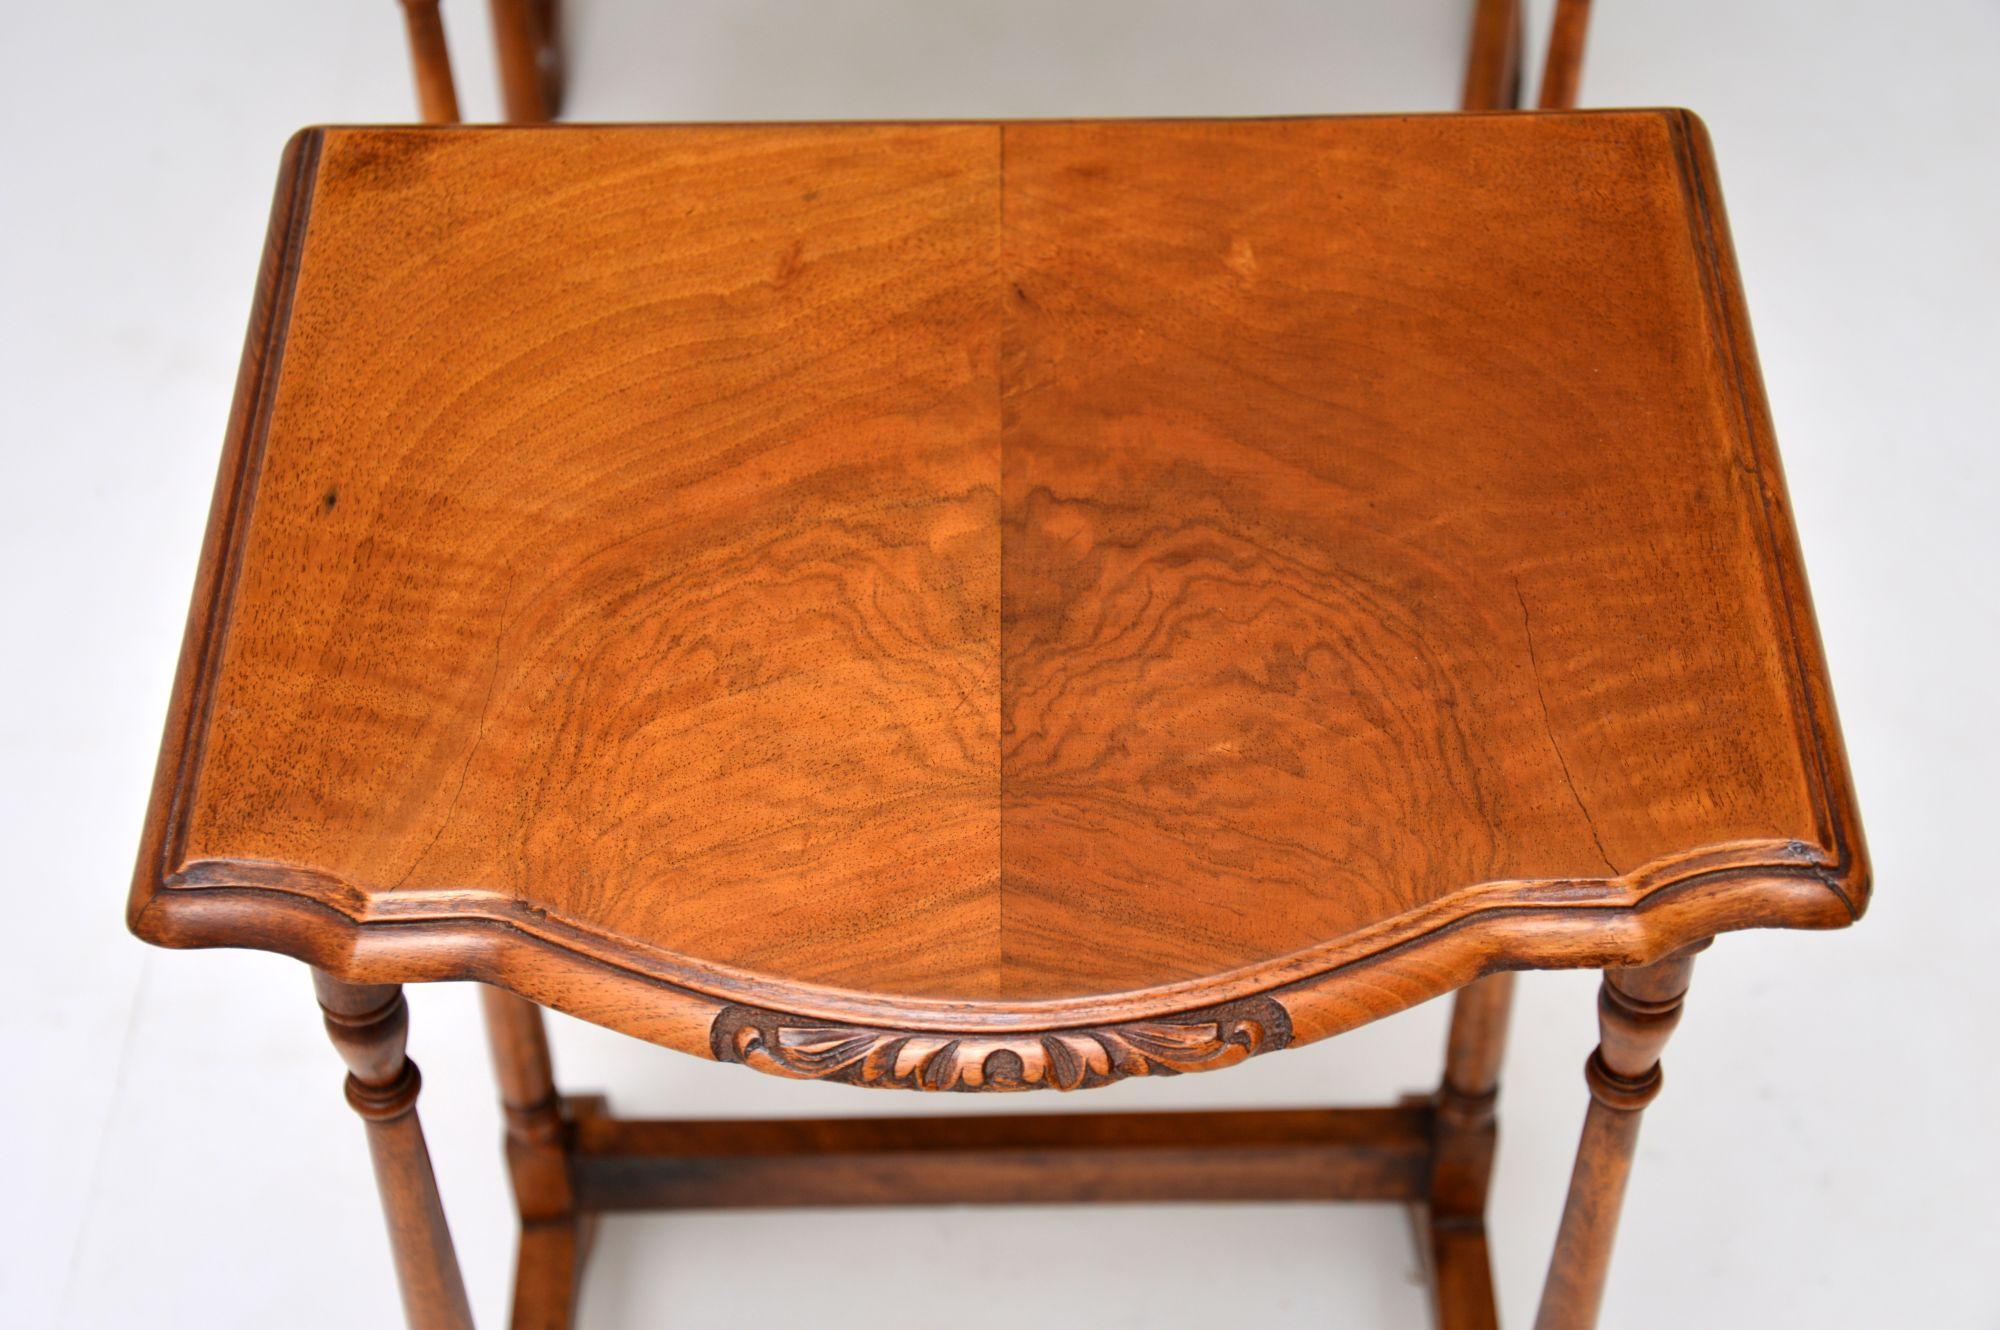 Early 20th Century Antique Burr Walnut Nest of Tables